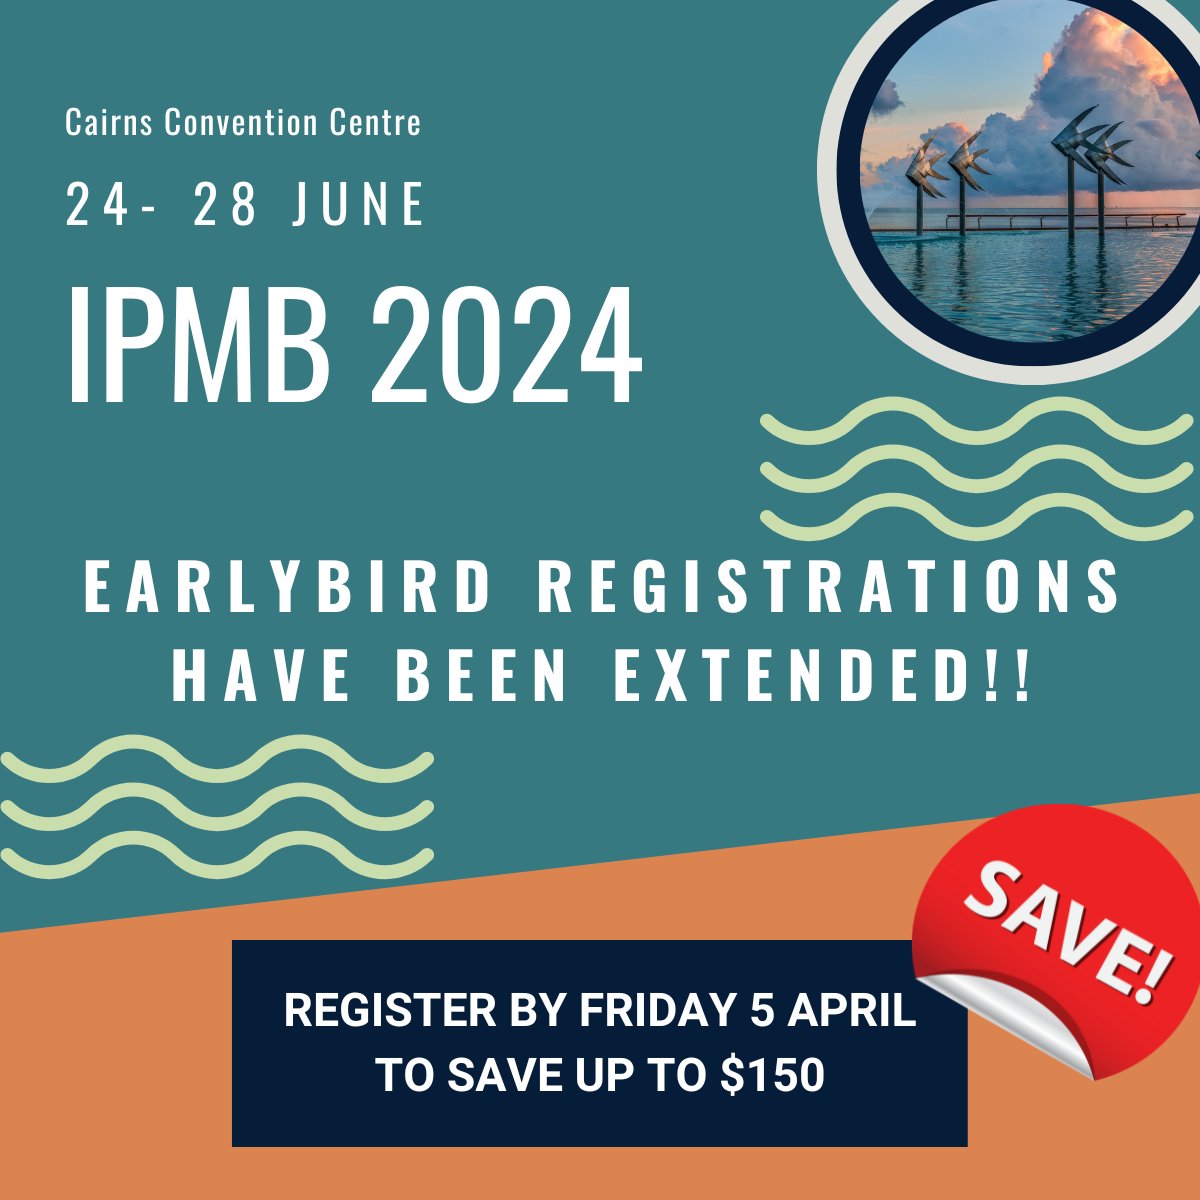 #IPMB2024 early bird registrations extended until 5 April!